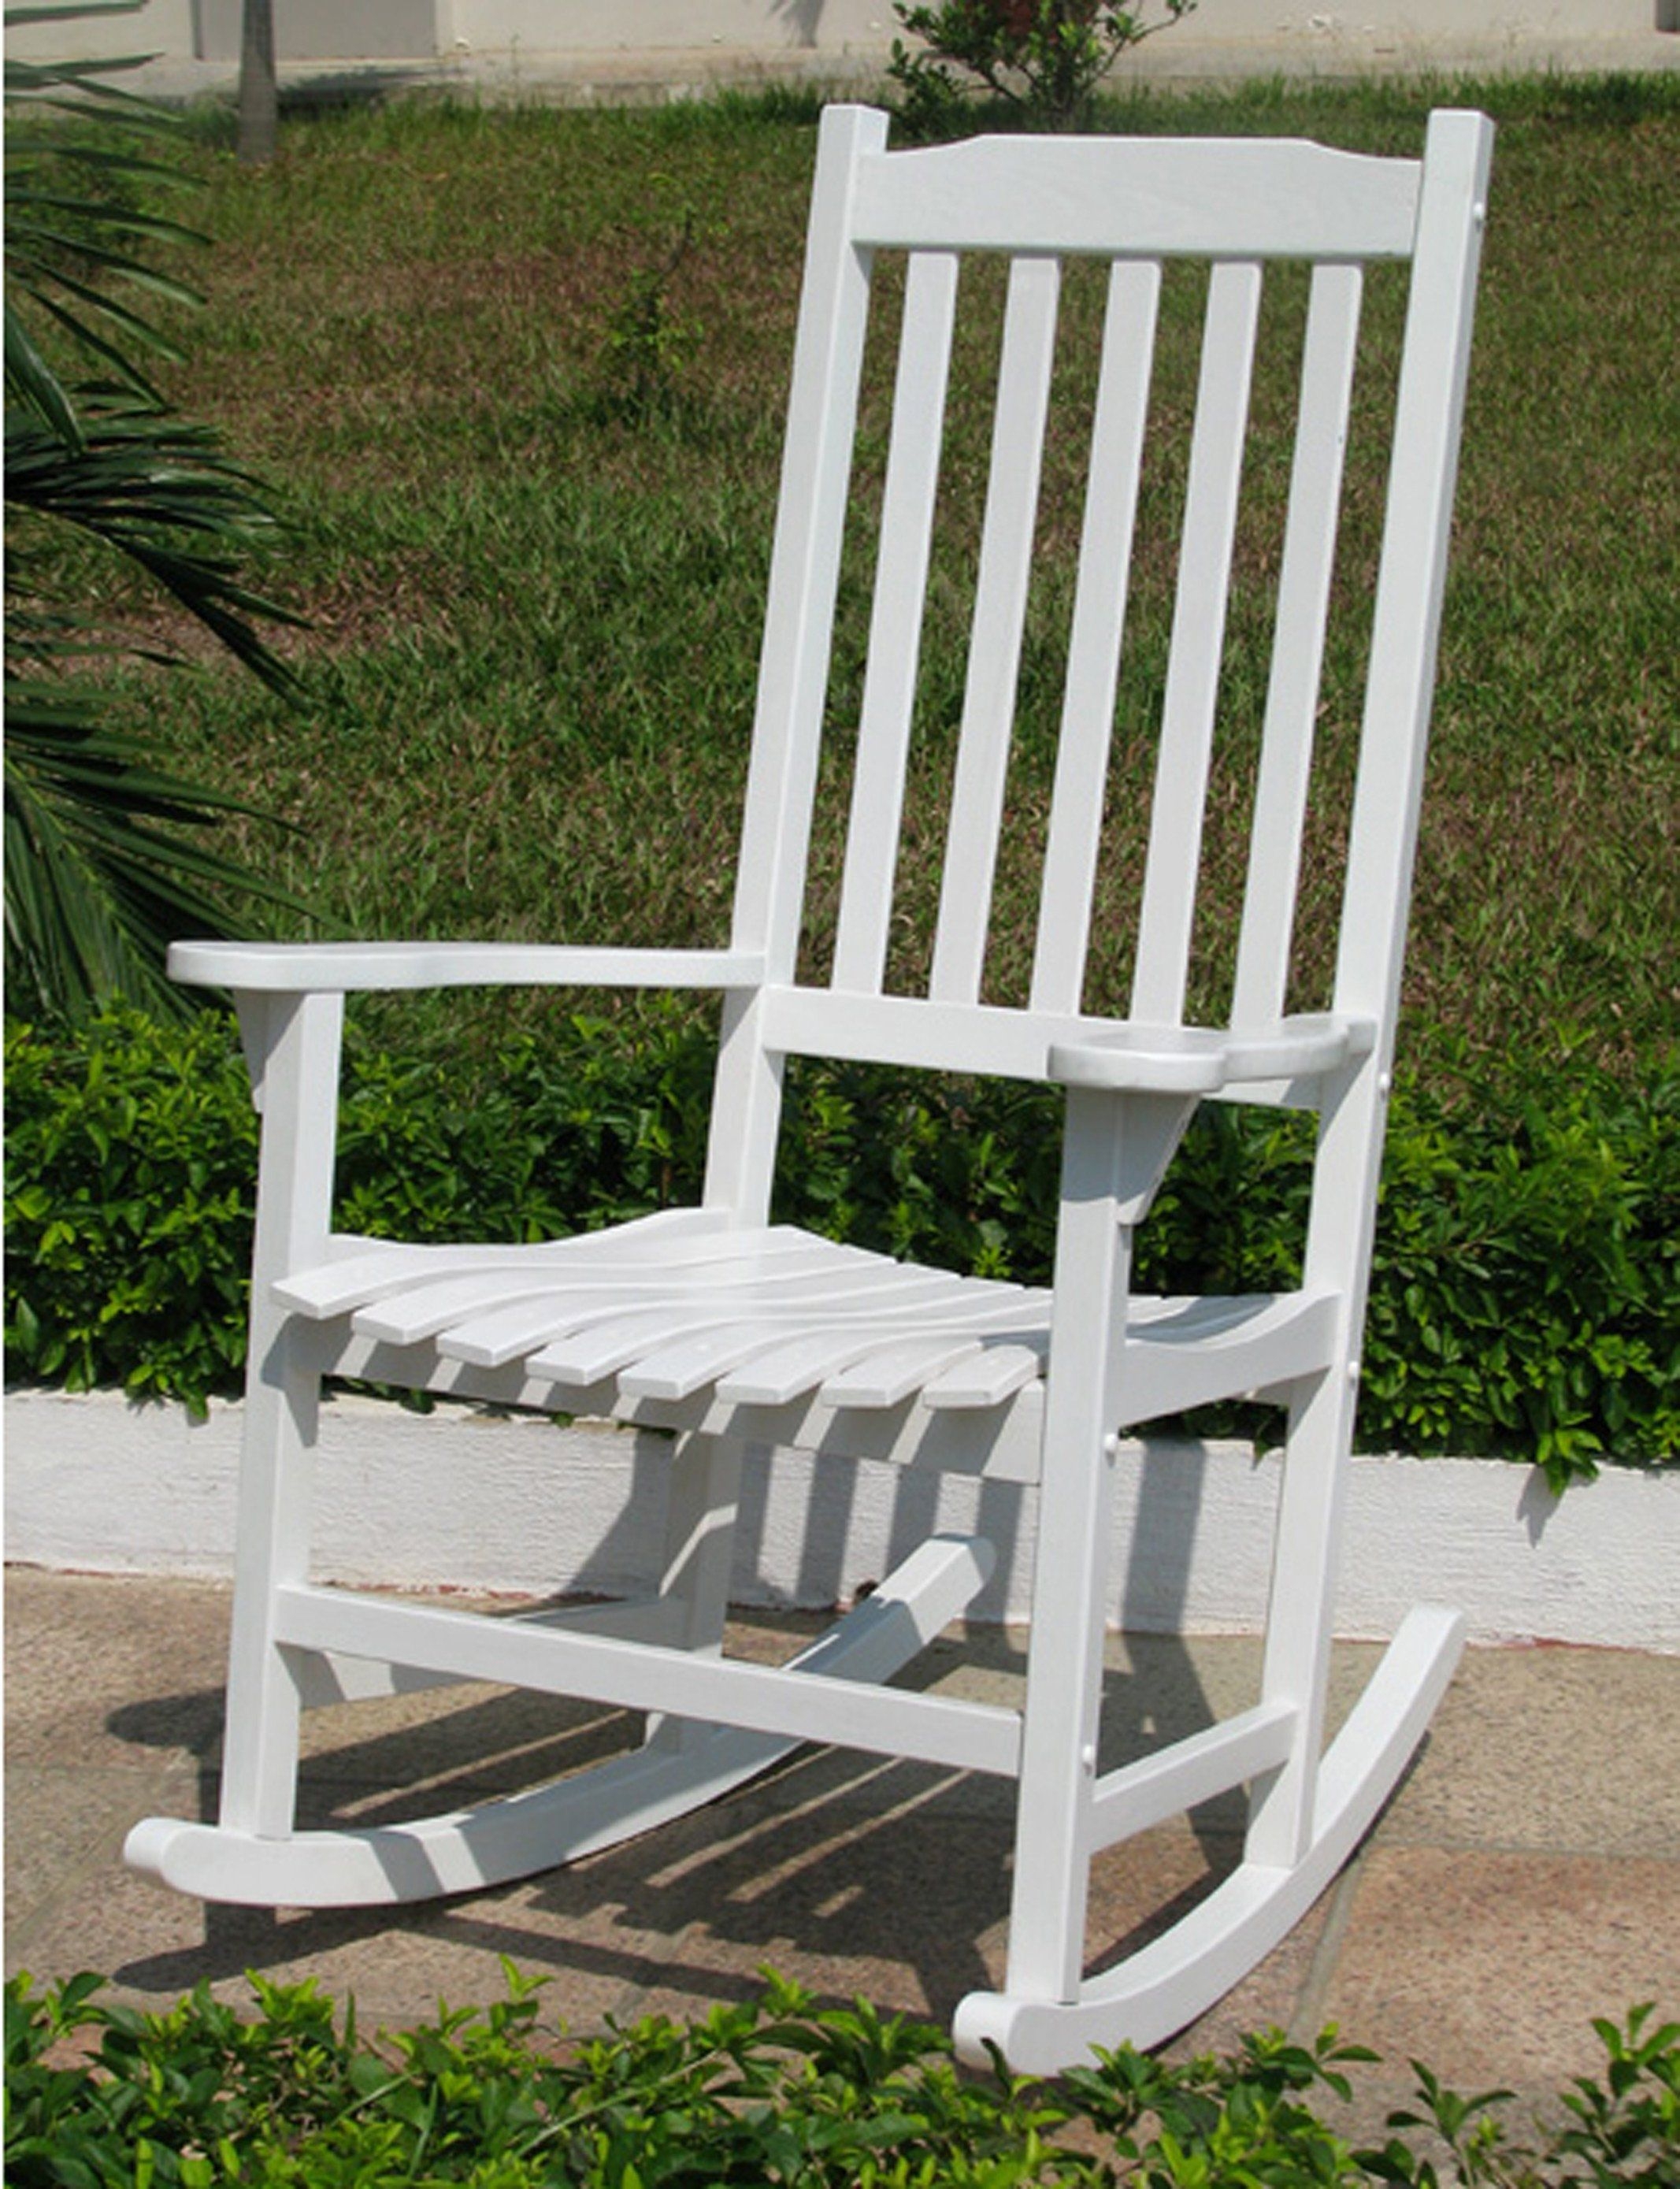 Merry Garden White Paint Traditional Rocking Chair